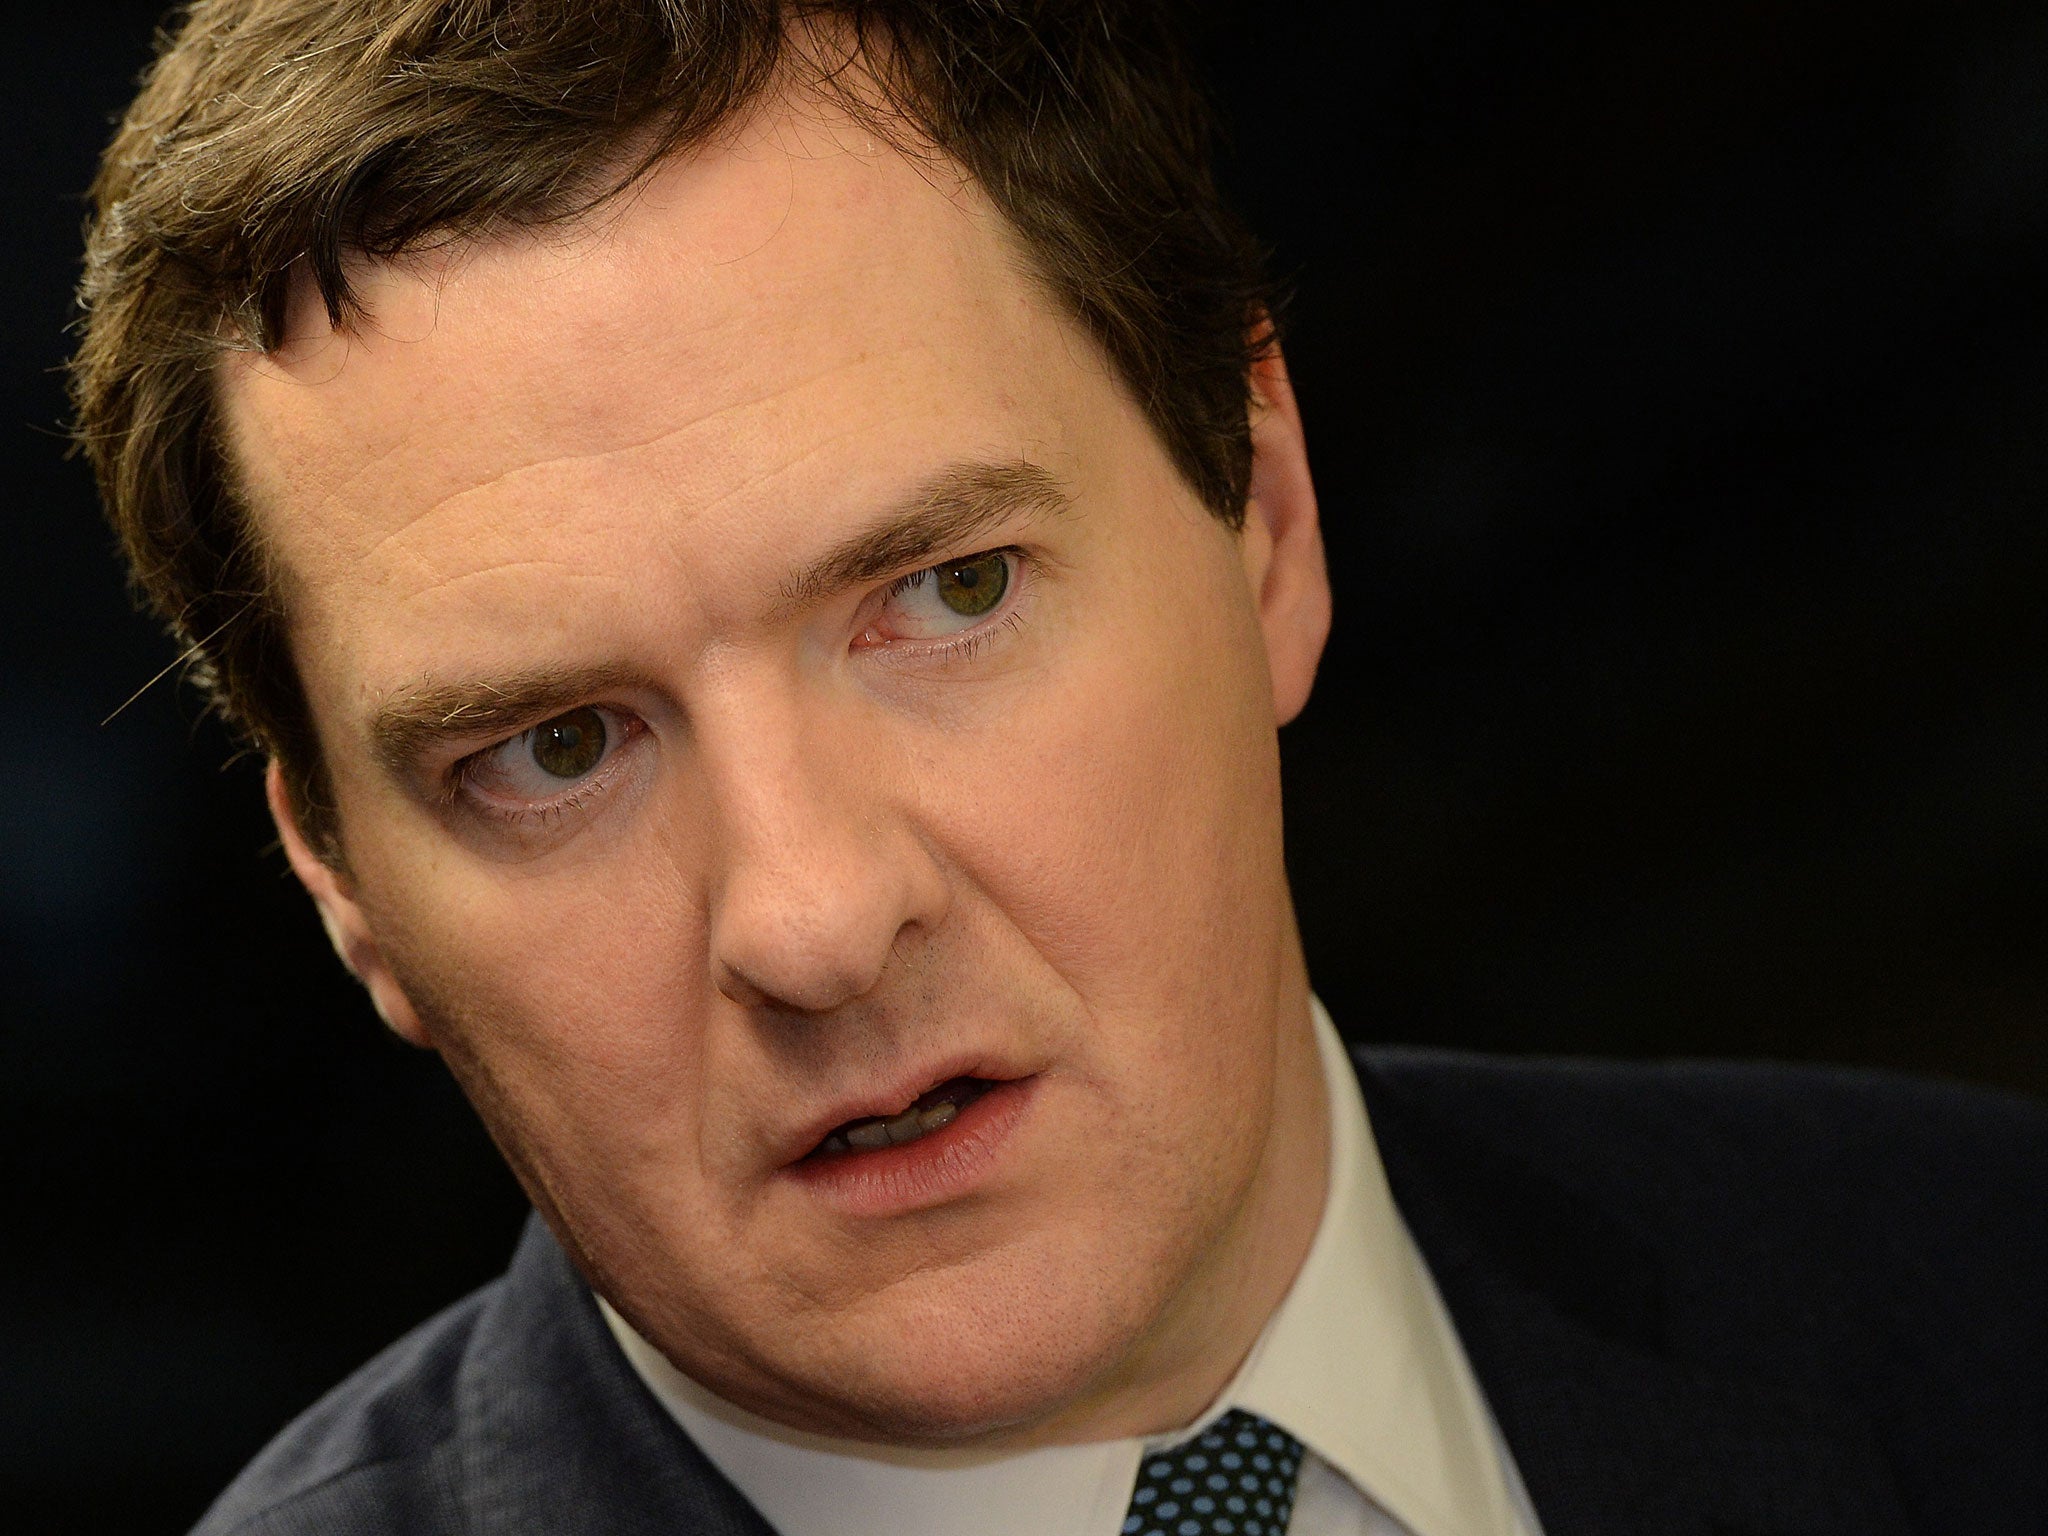 The Chancellor is examining the capital's buoyant property market as a potential source of extra revenue